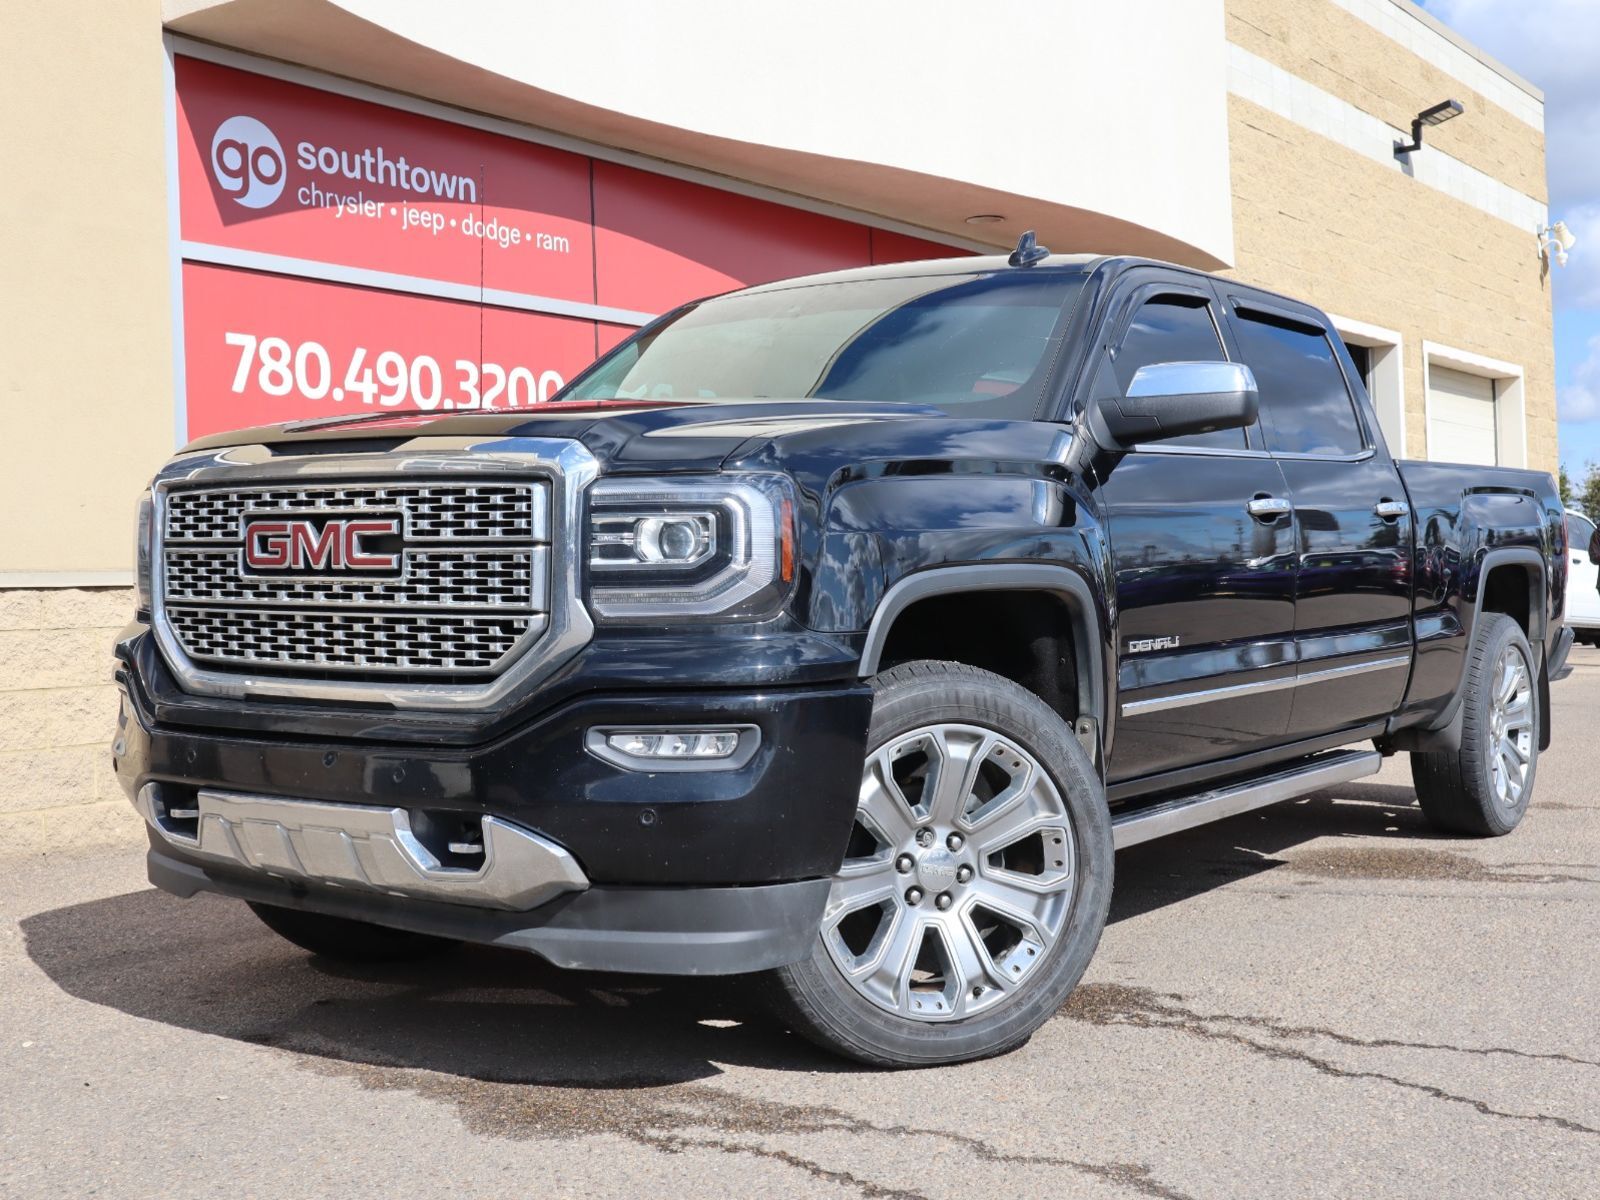 2018 GMC Sierra 1500 DENALI IN BLACK EQUIPPED WITH A 6.2L V8 , 4X4 , 8S